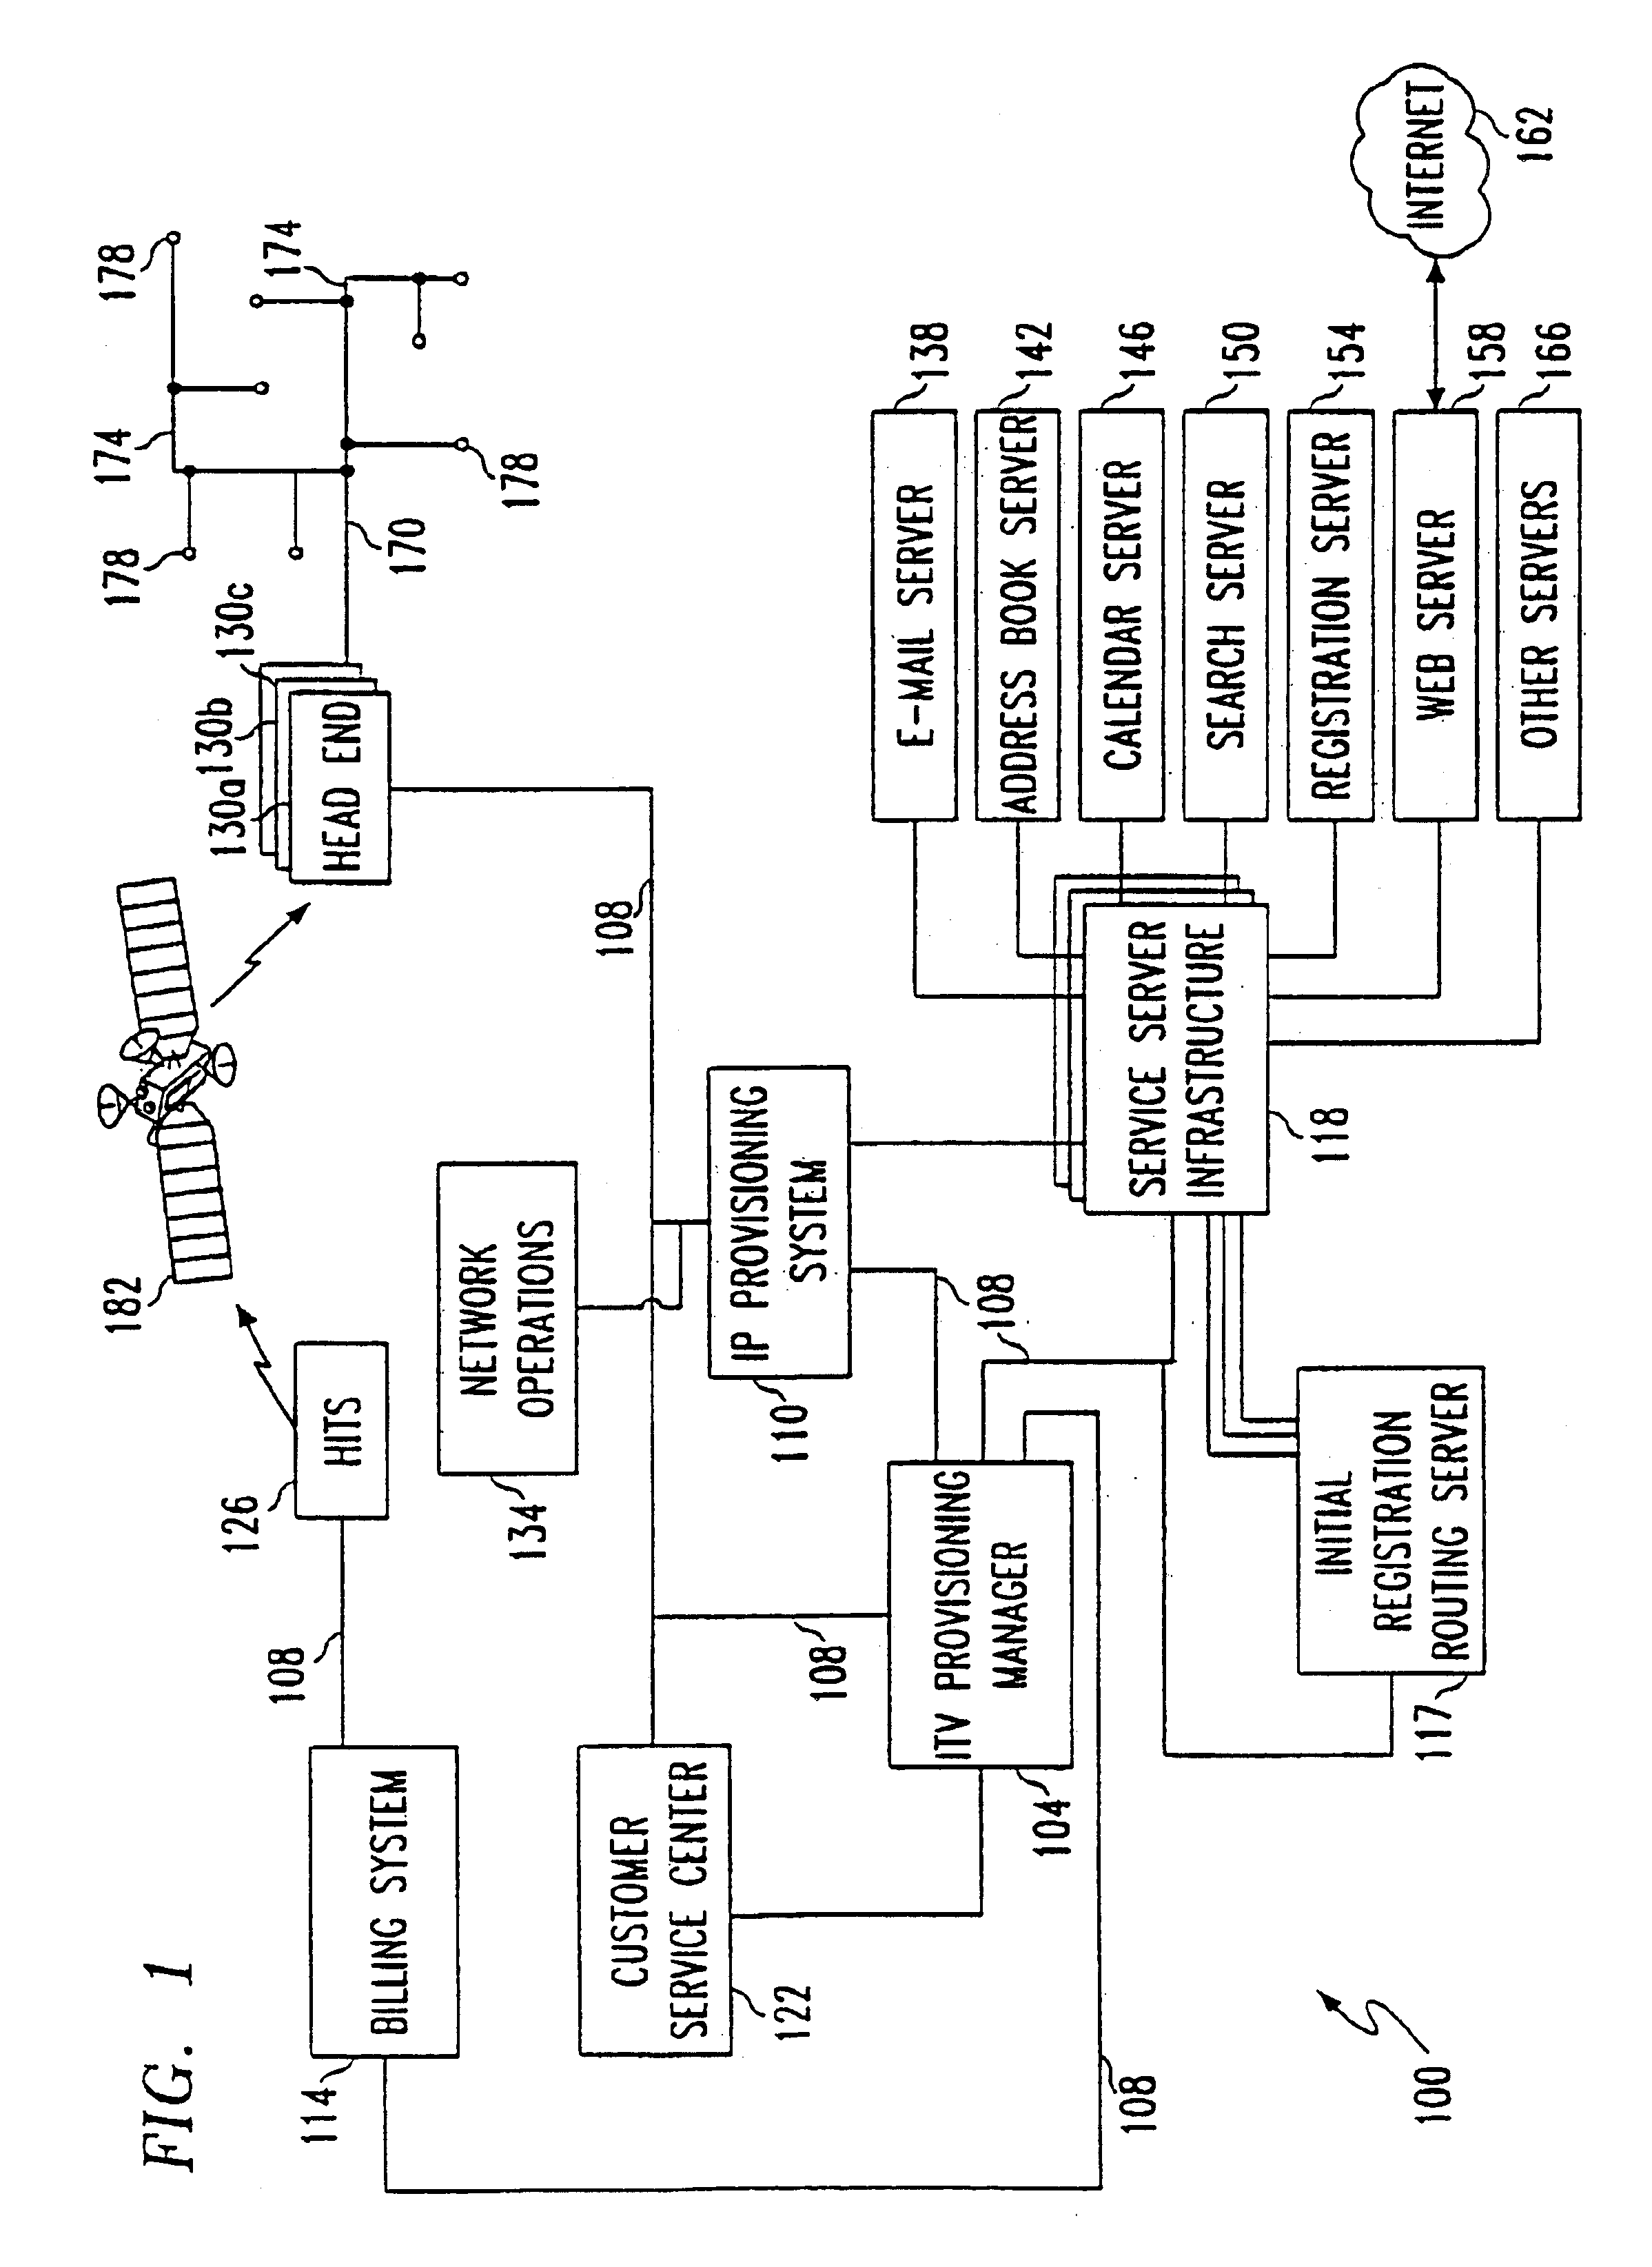 Method and apparatus for managing the provisioning of client devices connected to an interactive TV network